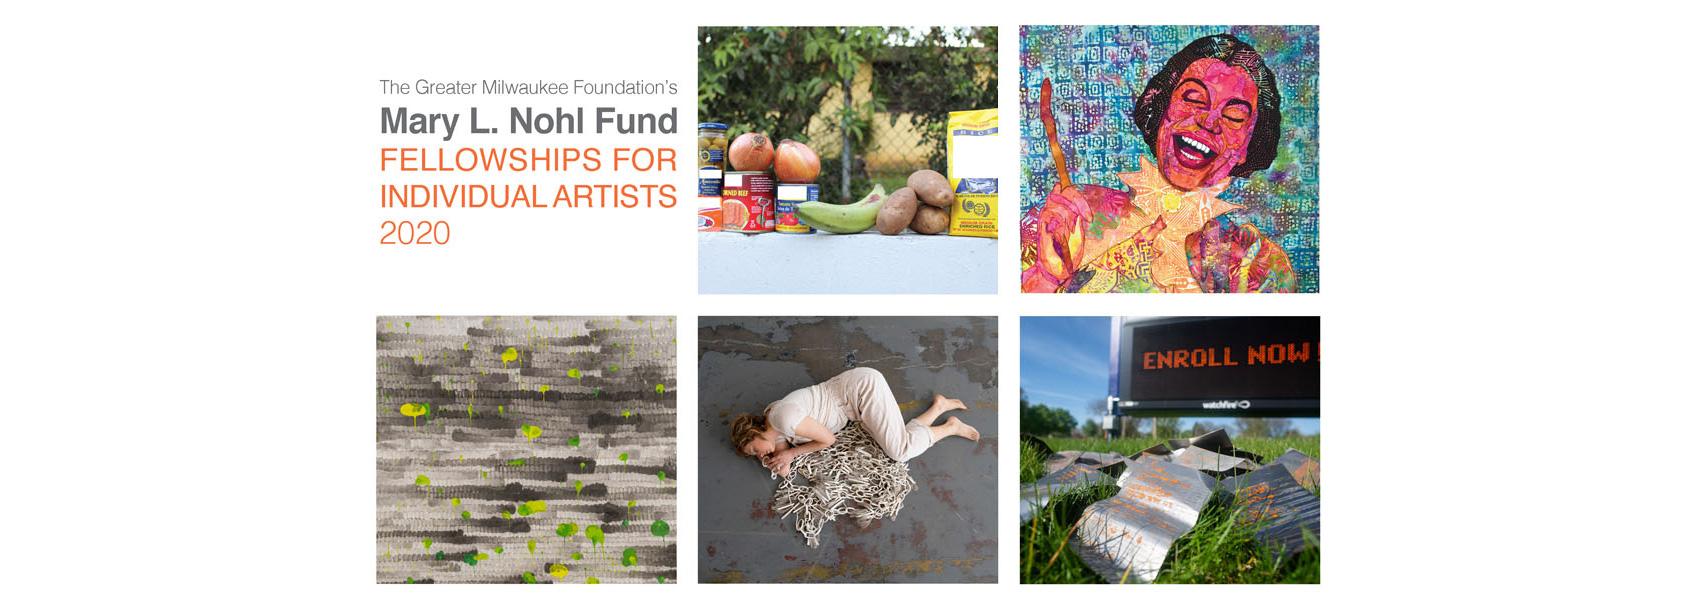 Artwork by the winners of the 2020 Mary L. Nohl Fund Fellowships at the Haggerty Museum of Art at Marquette University.